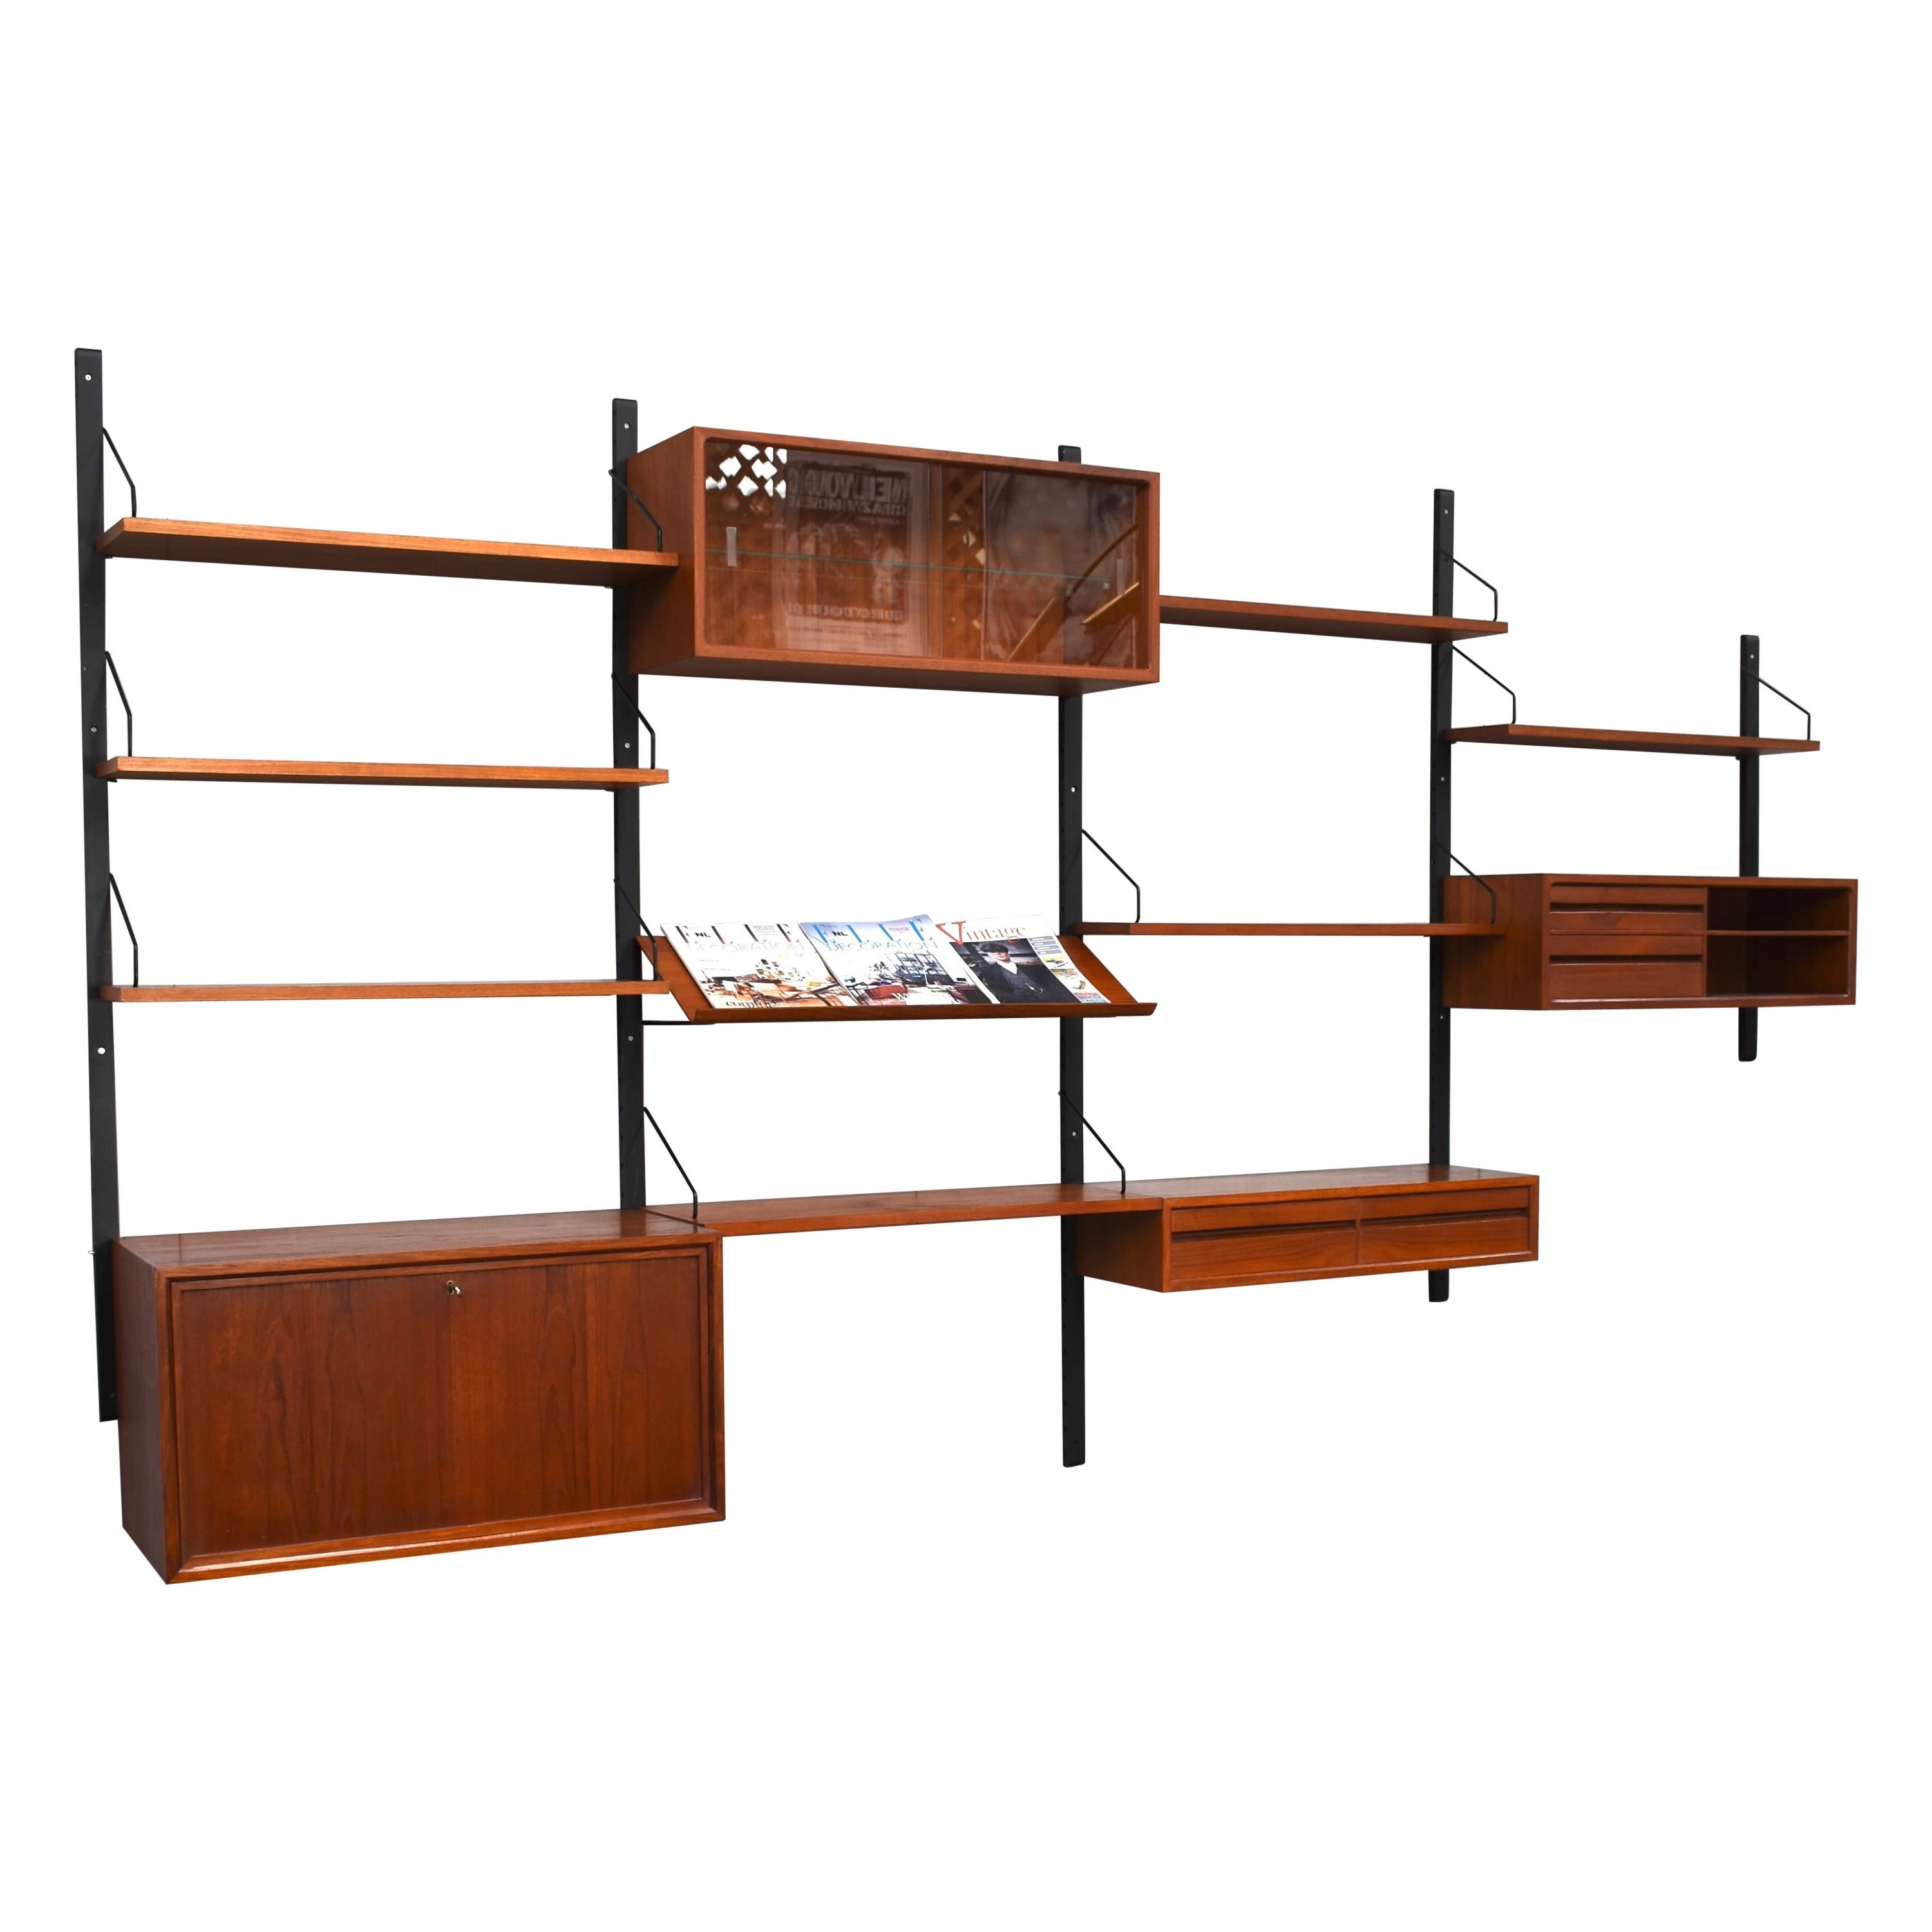 Royal Series Wall Unit by Poul Cadovius in Teak, Denmark, 1950s